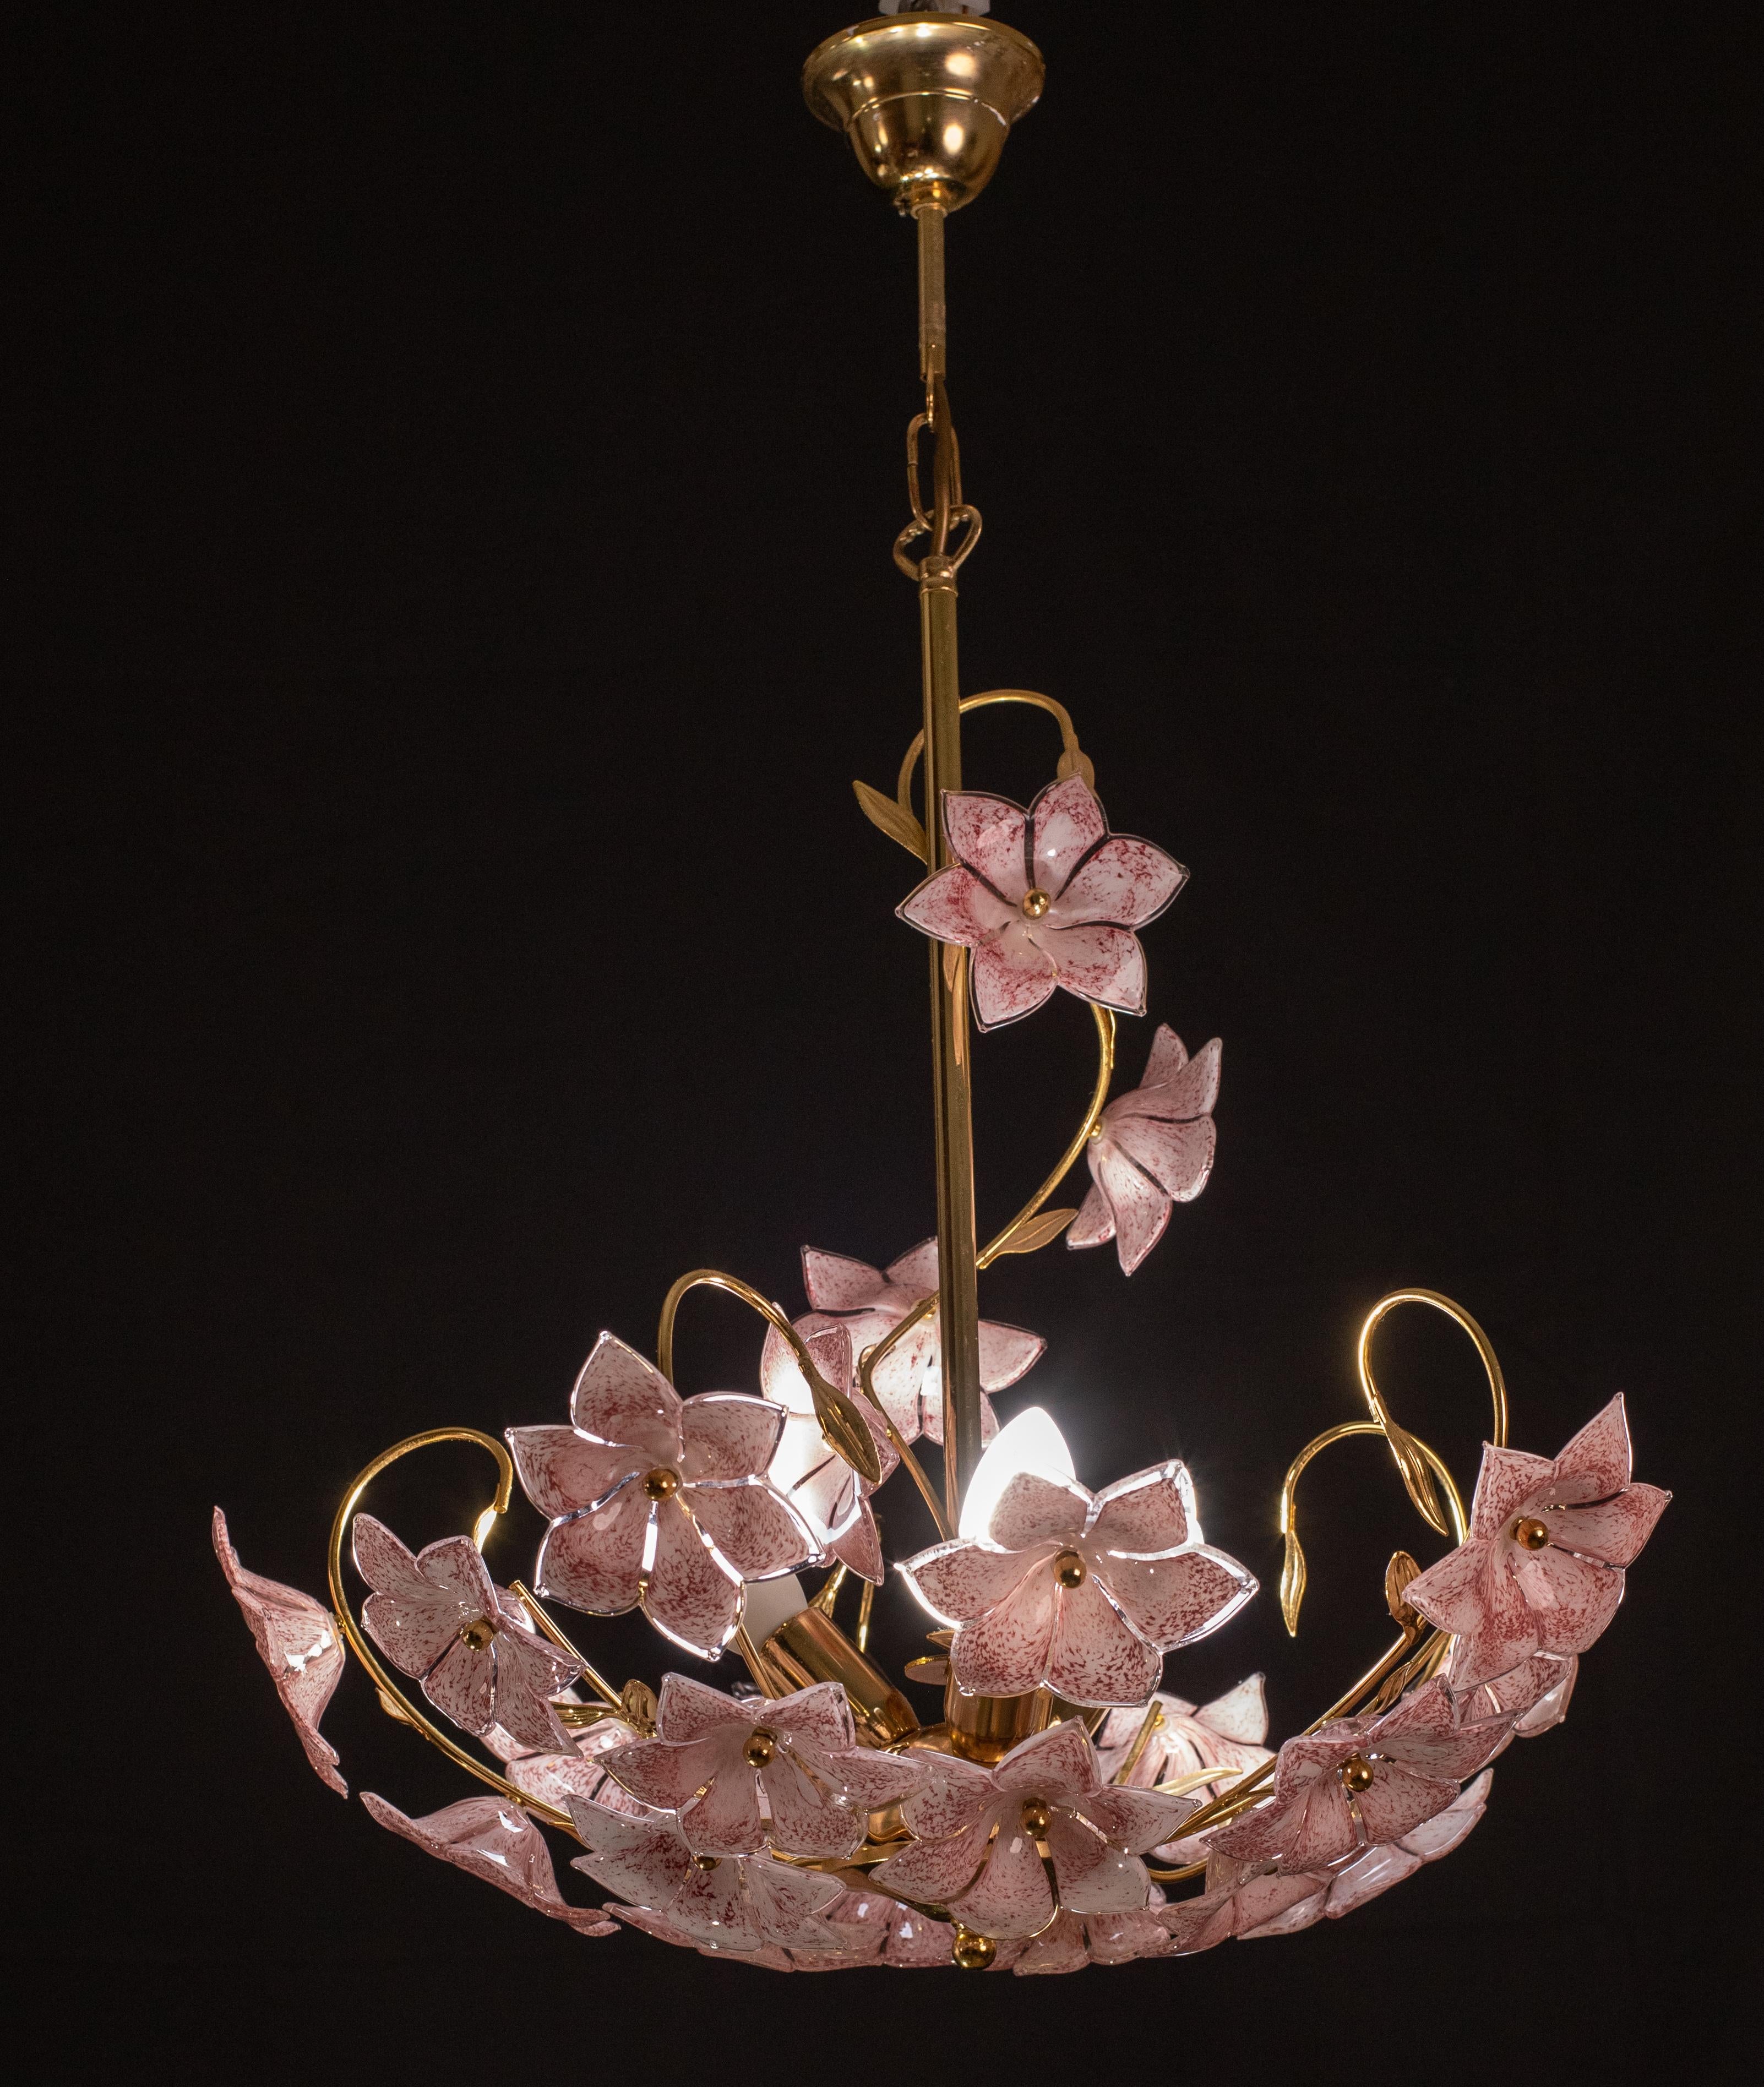 Vintage Murano glass chandelier full of pink flowers in murano glass.
The chandelier has 3 light points with E14 socket, possible to rewire for Usa standards.
The frame is made of gold bath in good vintage condition.
The height of the chandelier is